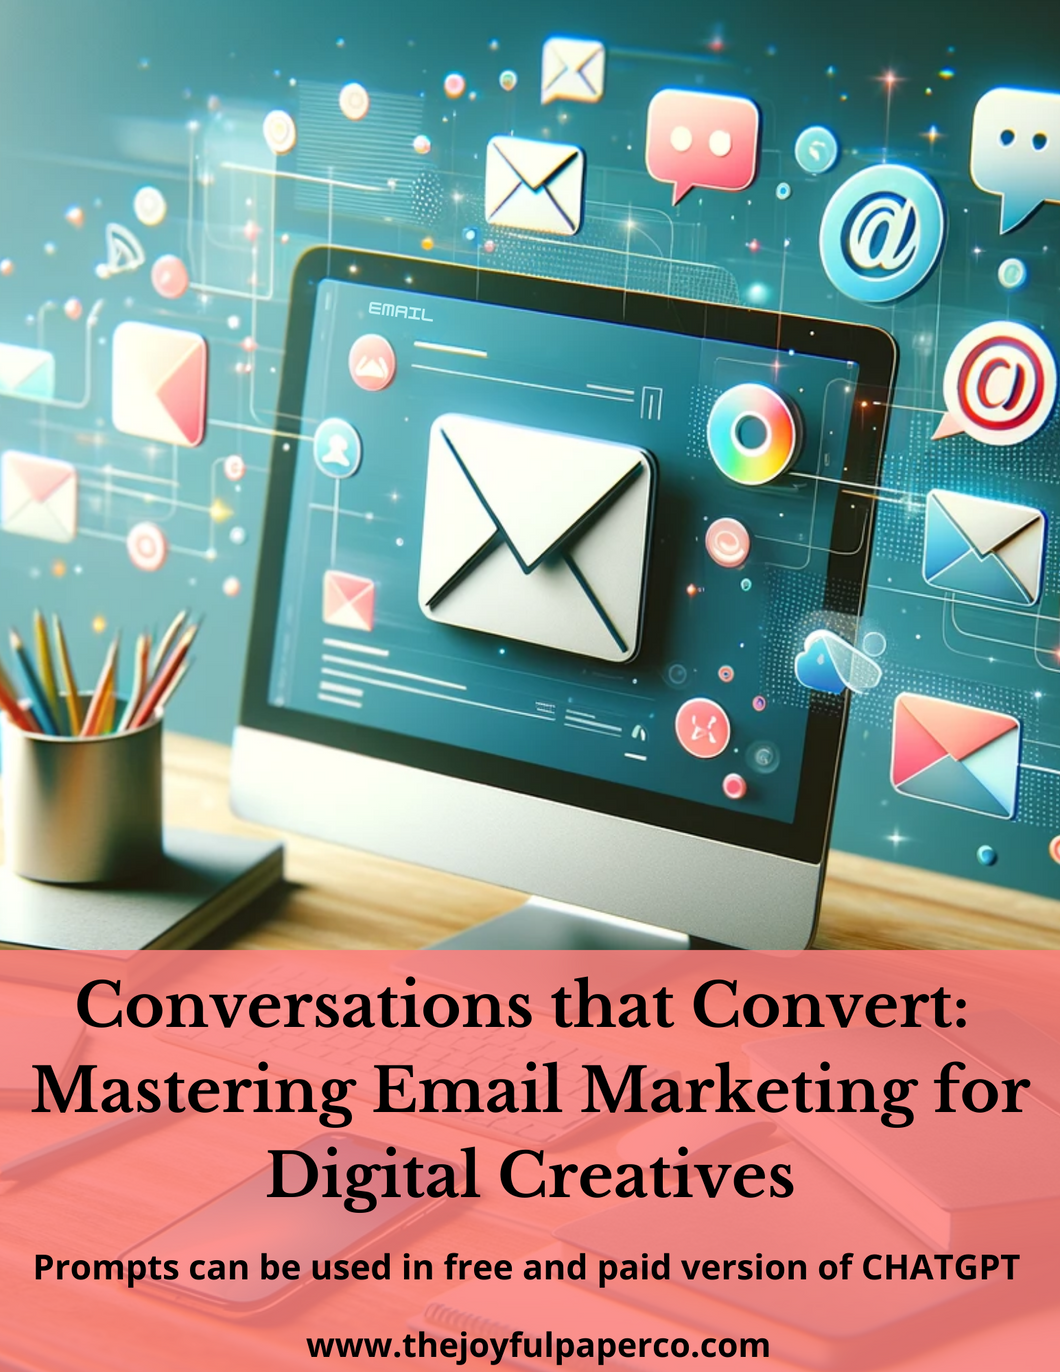 Conversations that Convert: Mastering Digital Marketing for Email Creatives